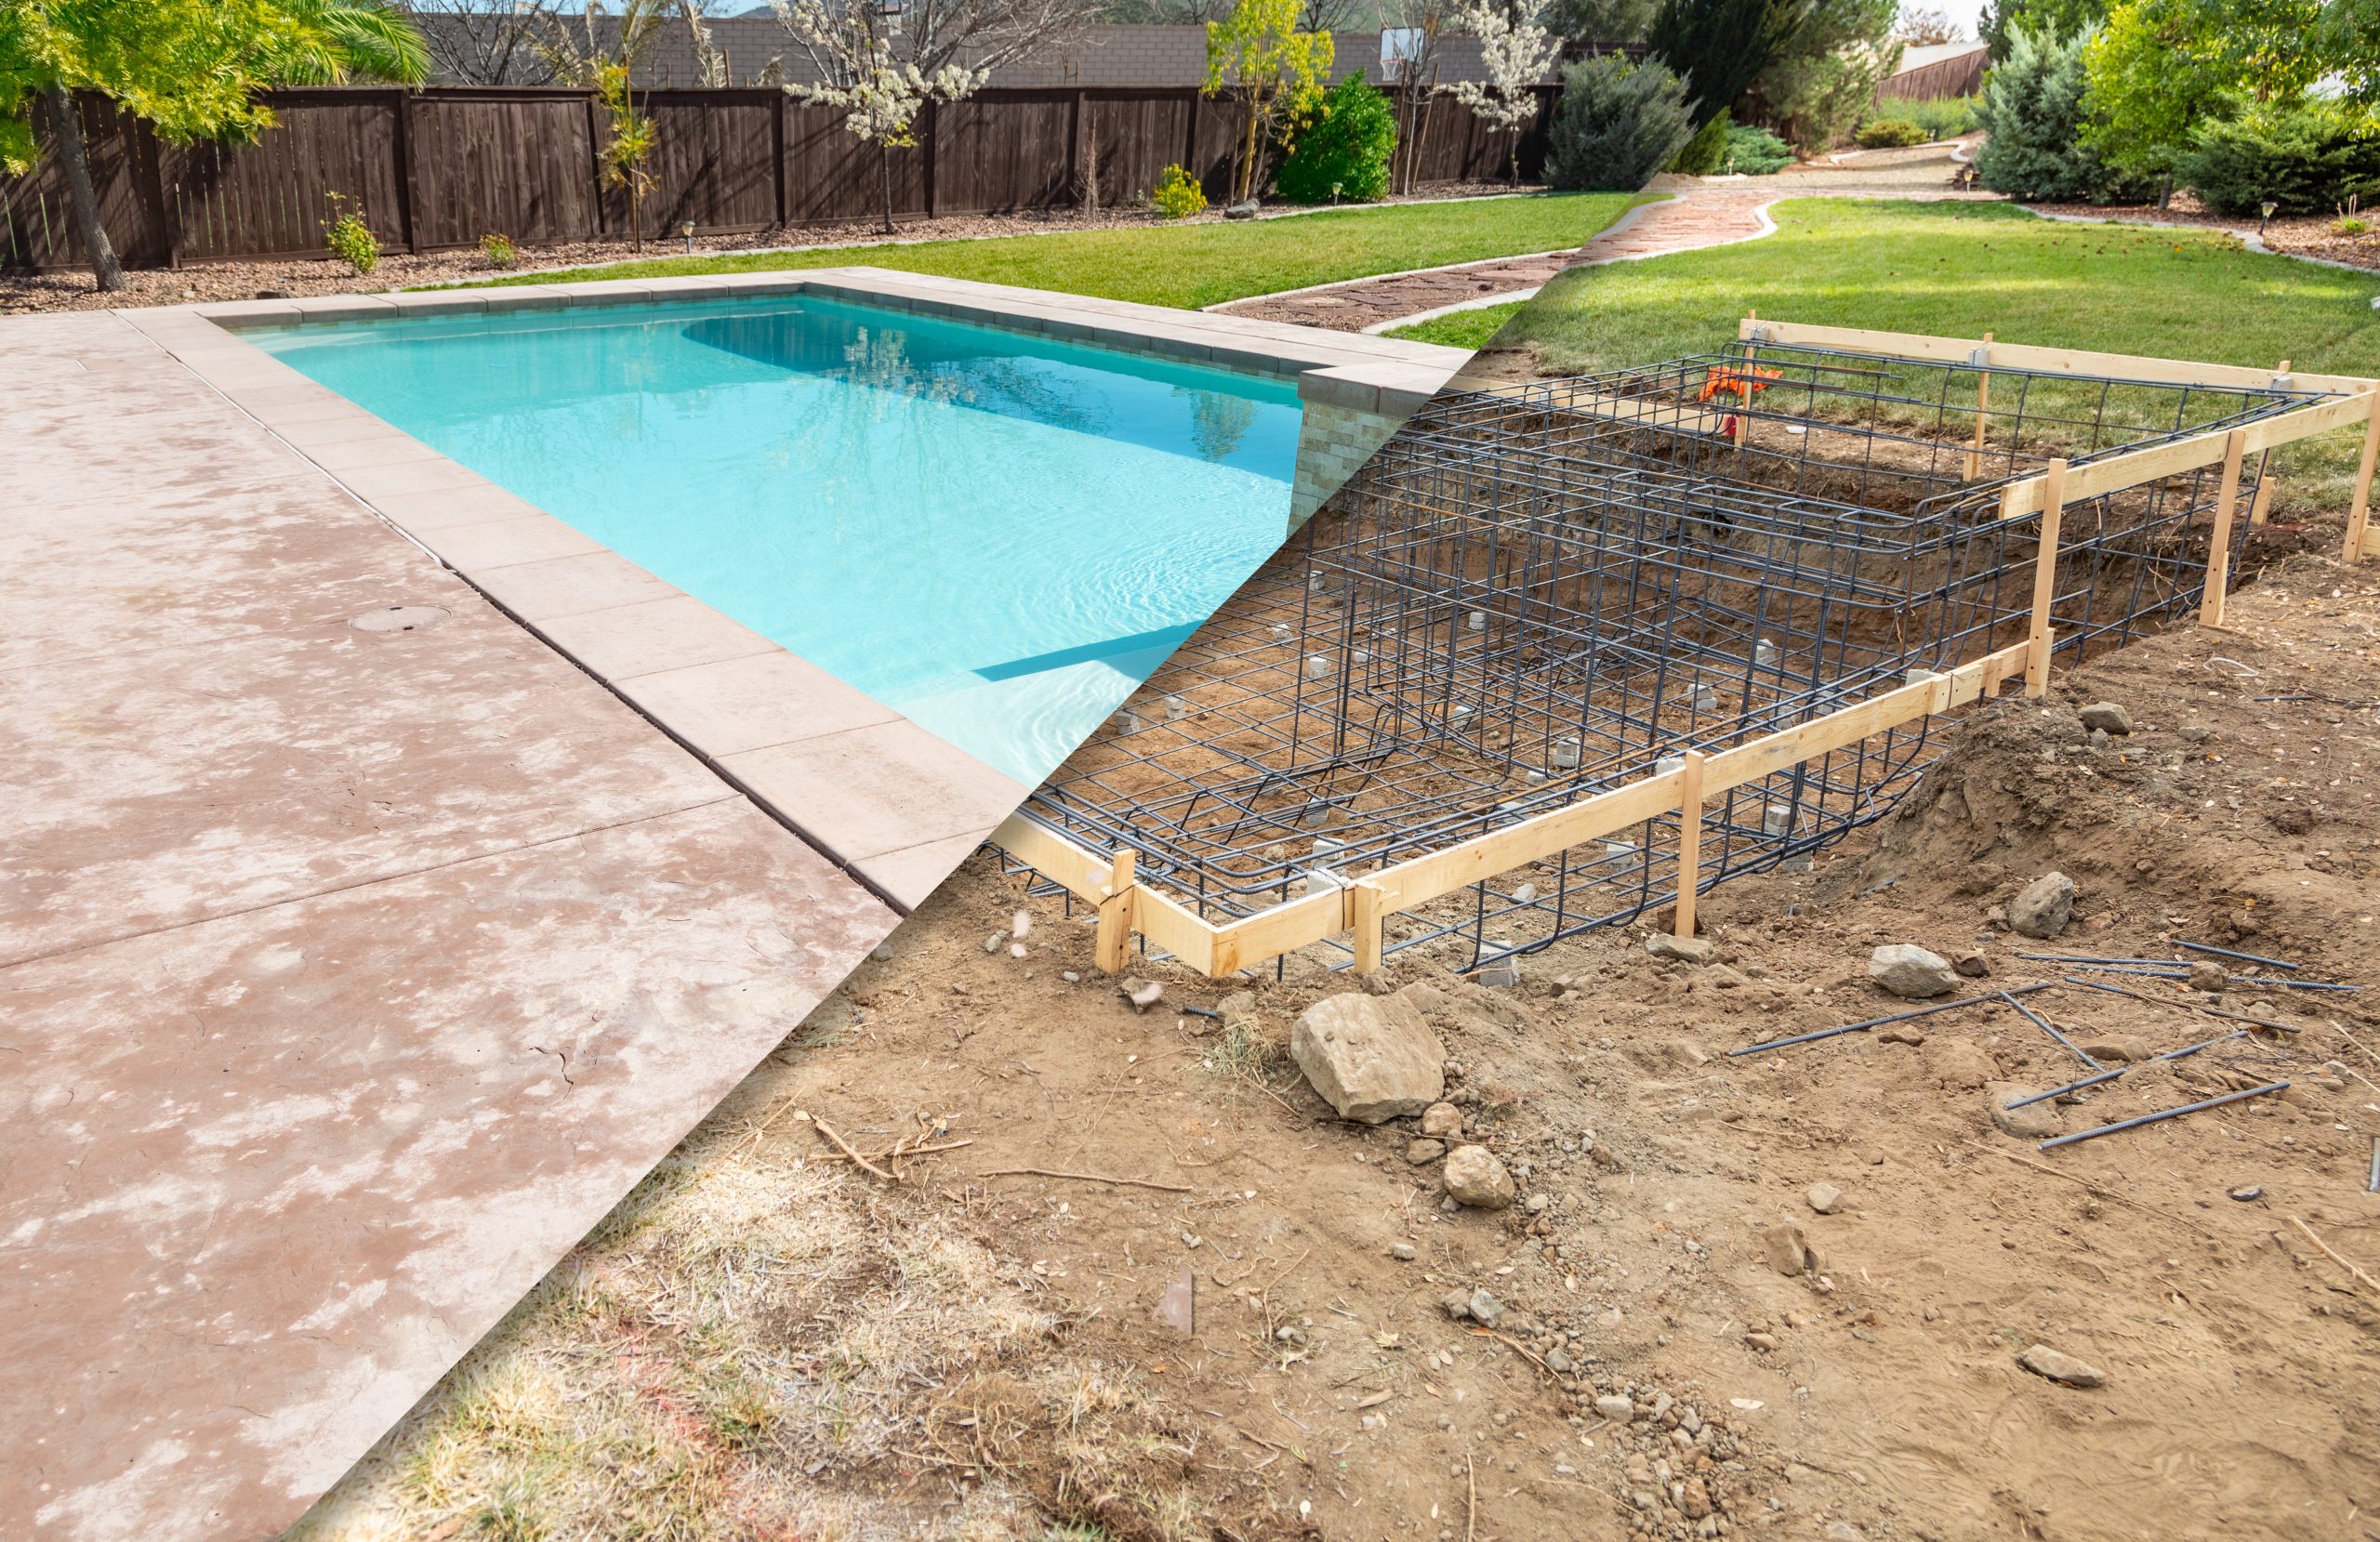 Before and After Pool Build Construction Site.